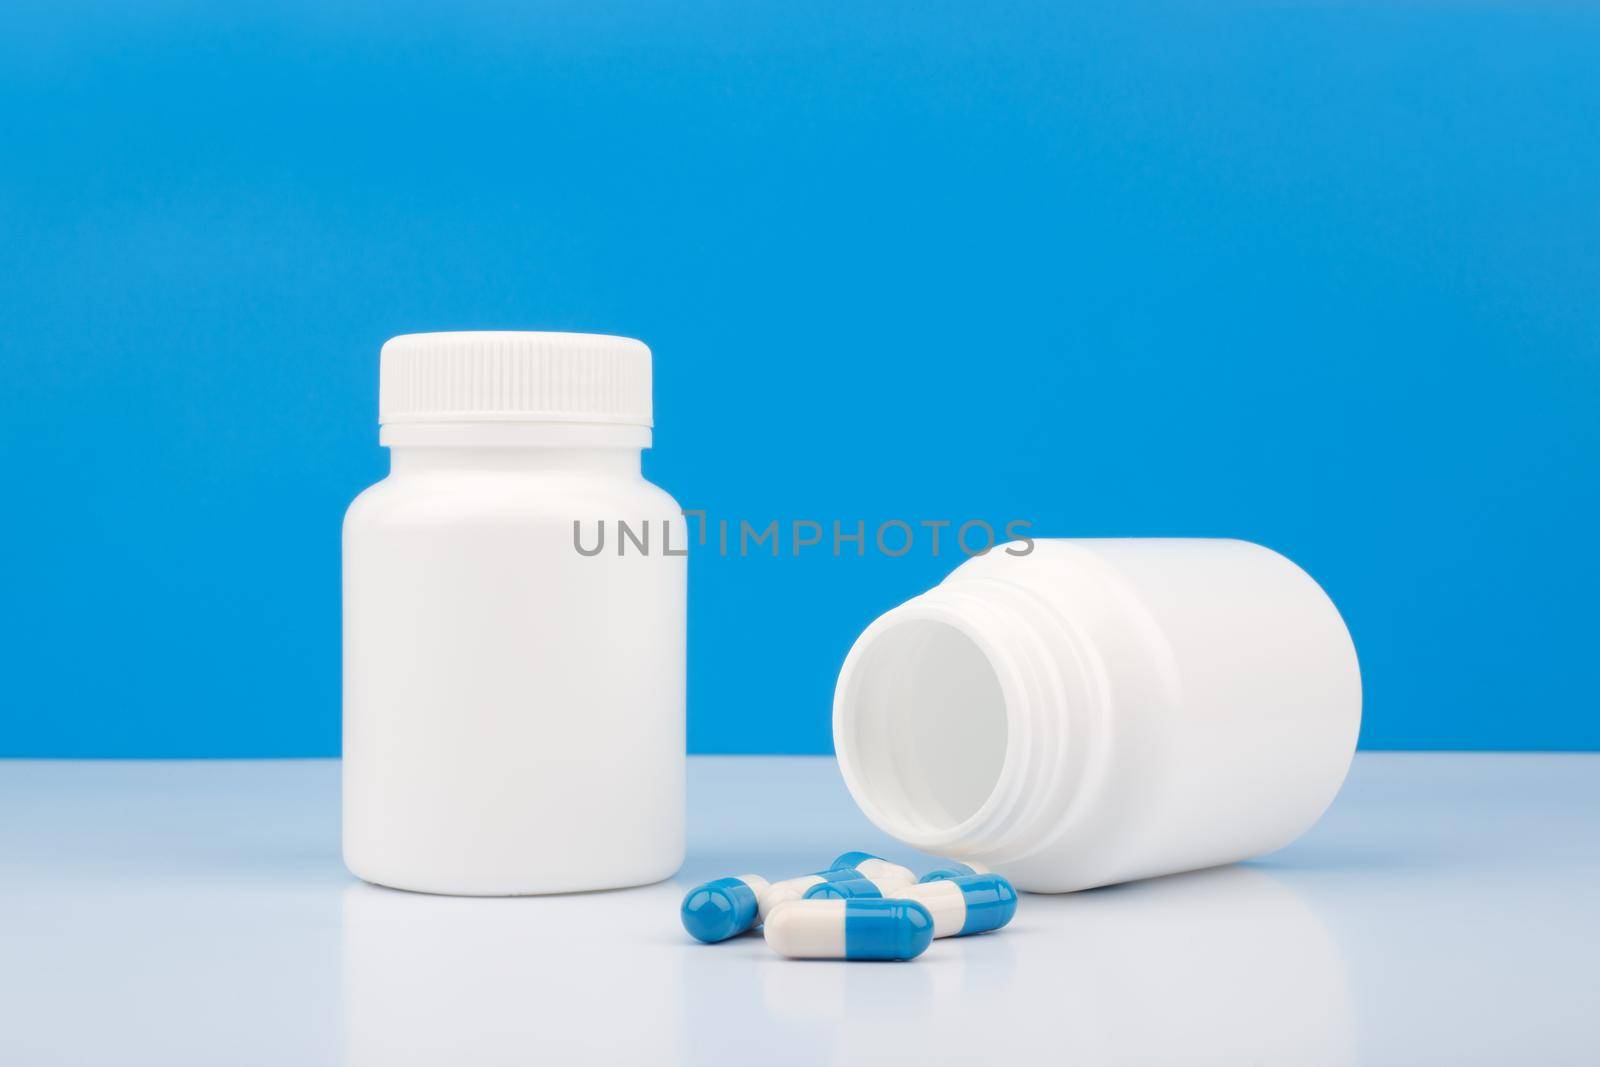 Two bottles with pills against blue background. Close up of medication bottles with spilled pills. Concept of healthcare and medical treatment